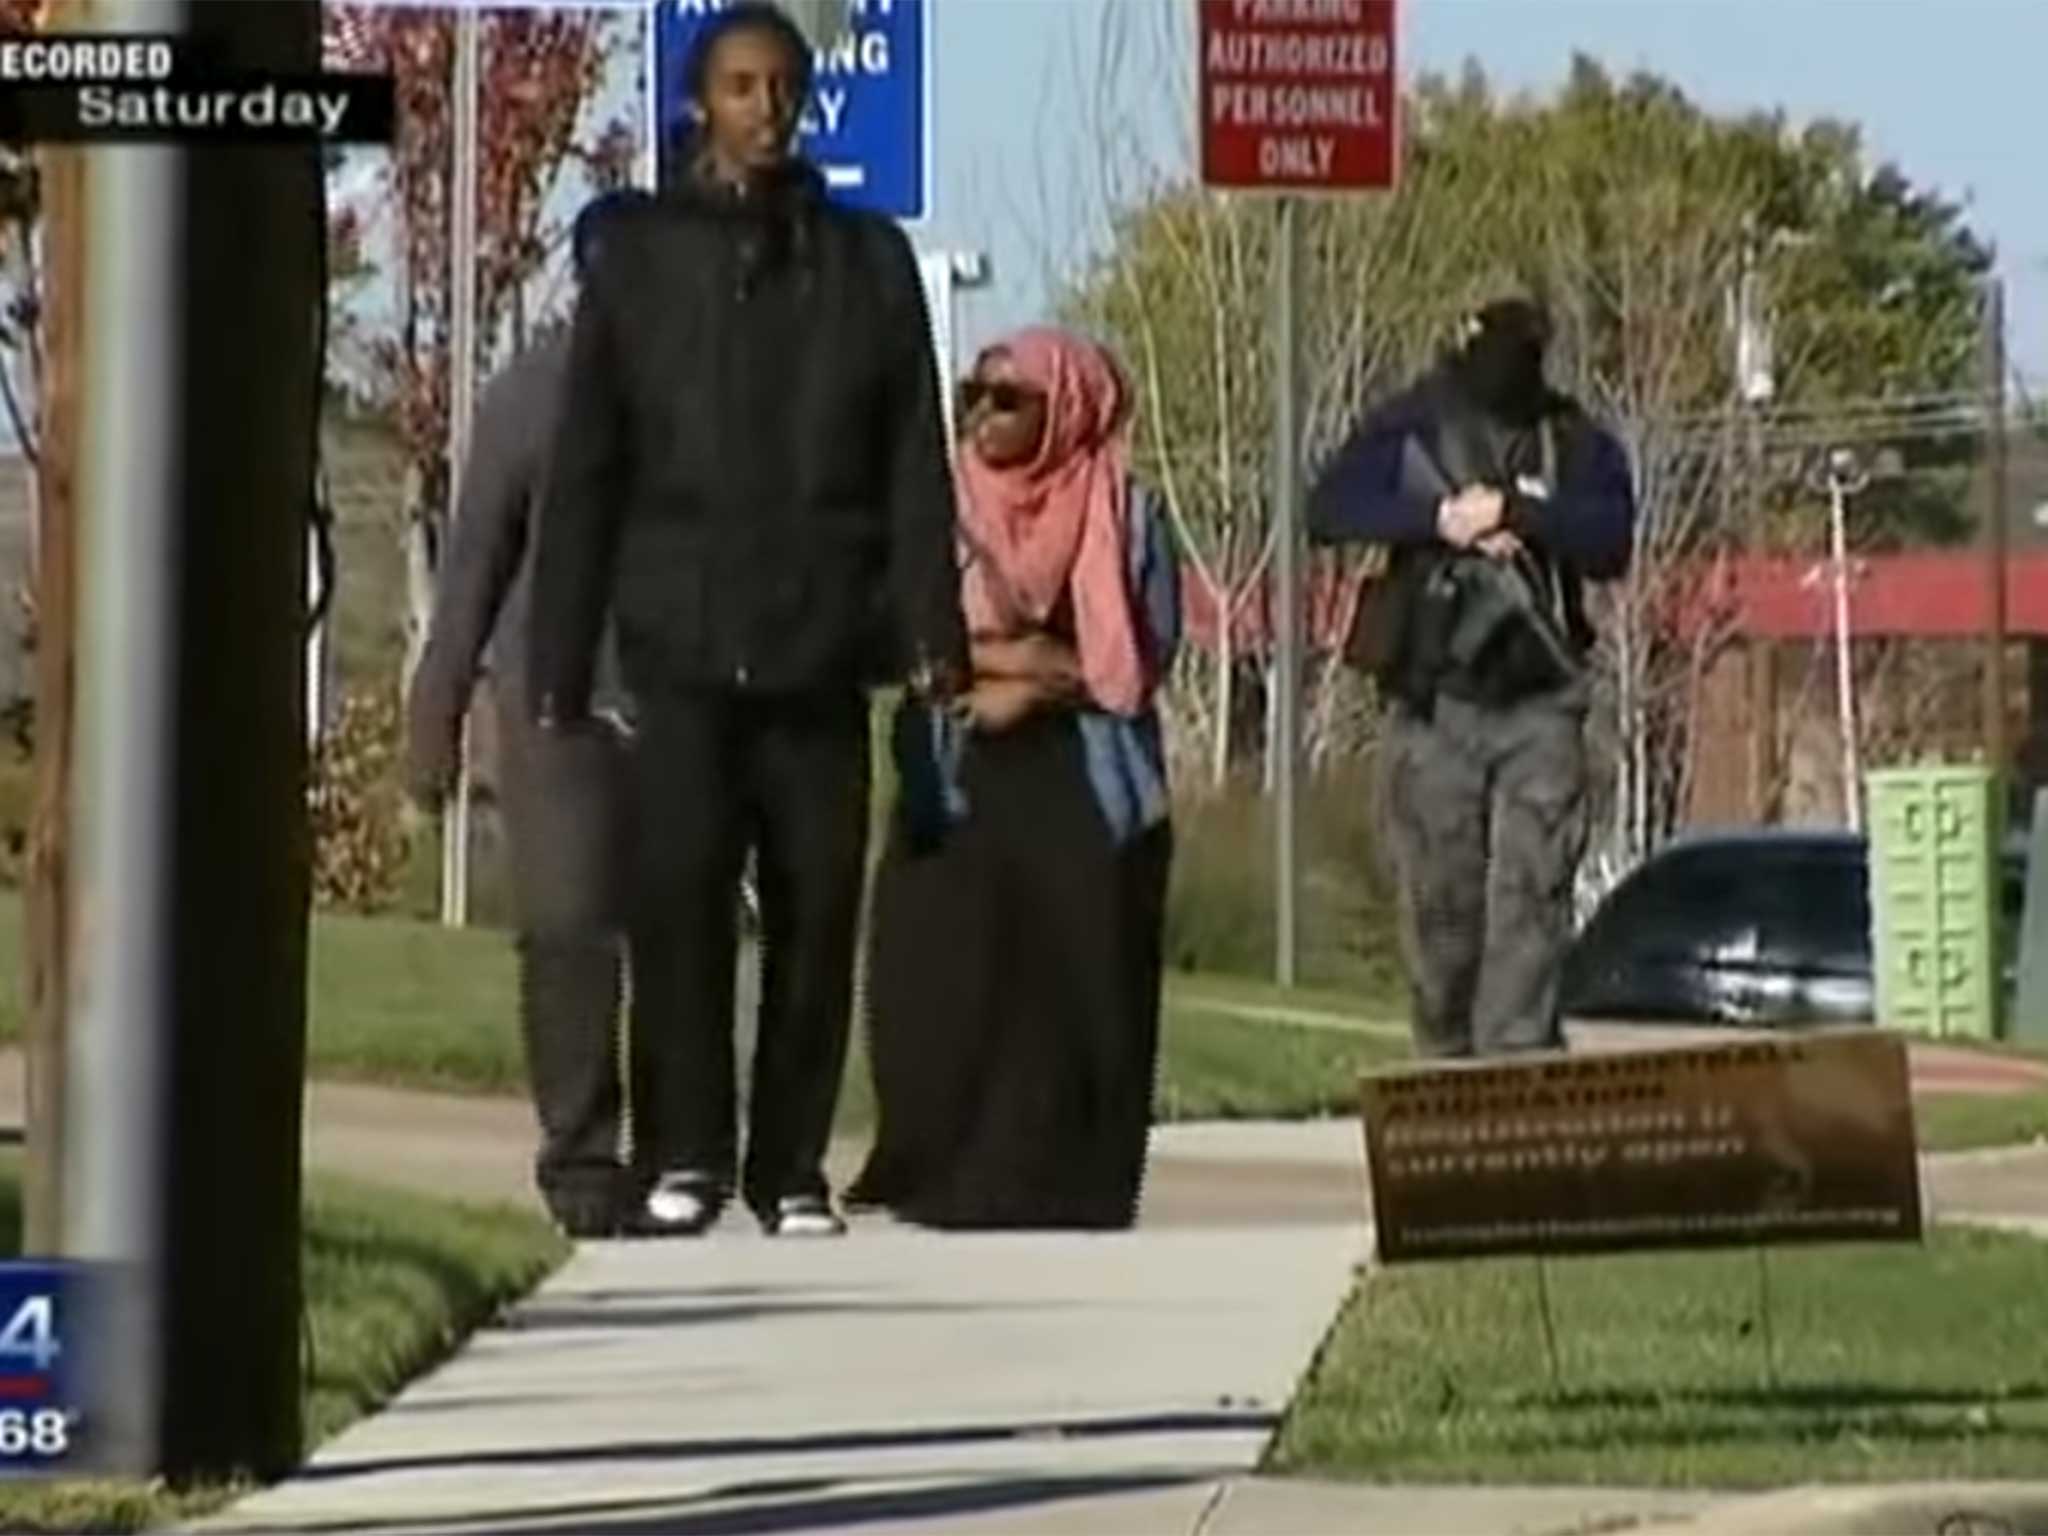 An individual apparently involved in the BAIR protester near the Irving mosque